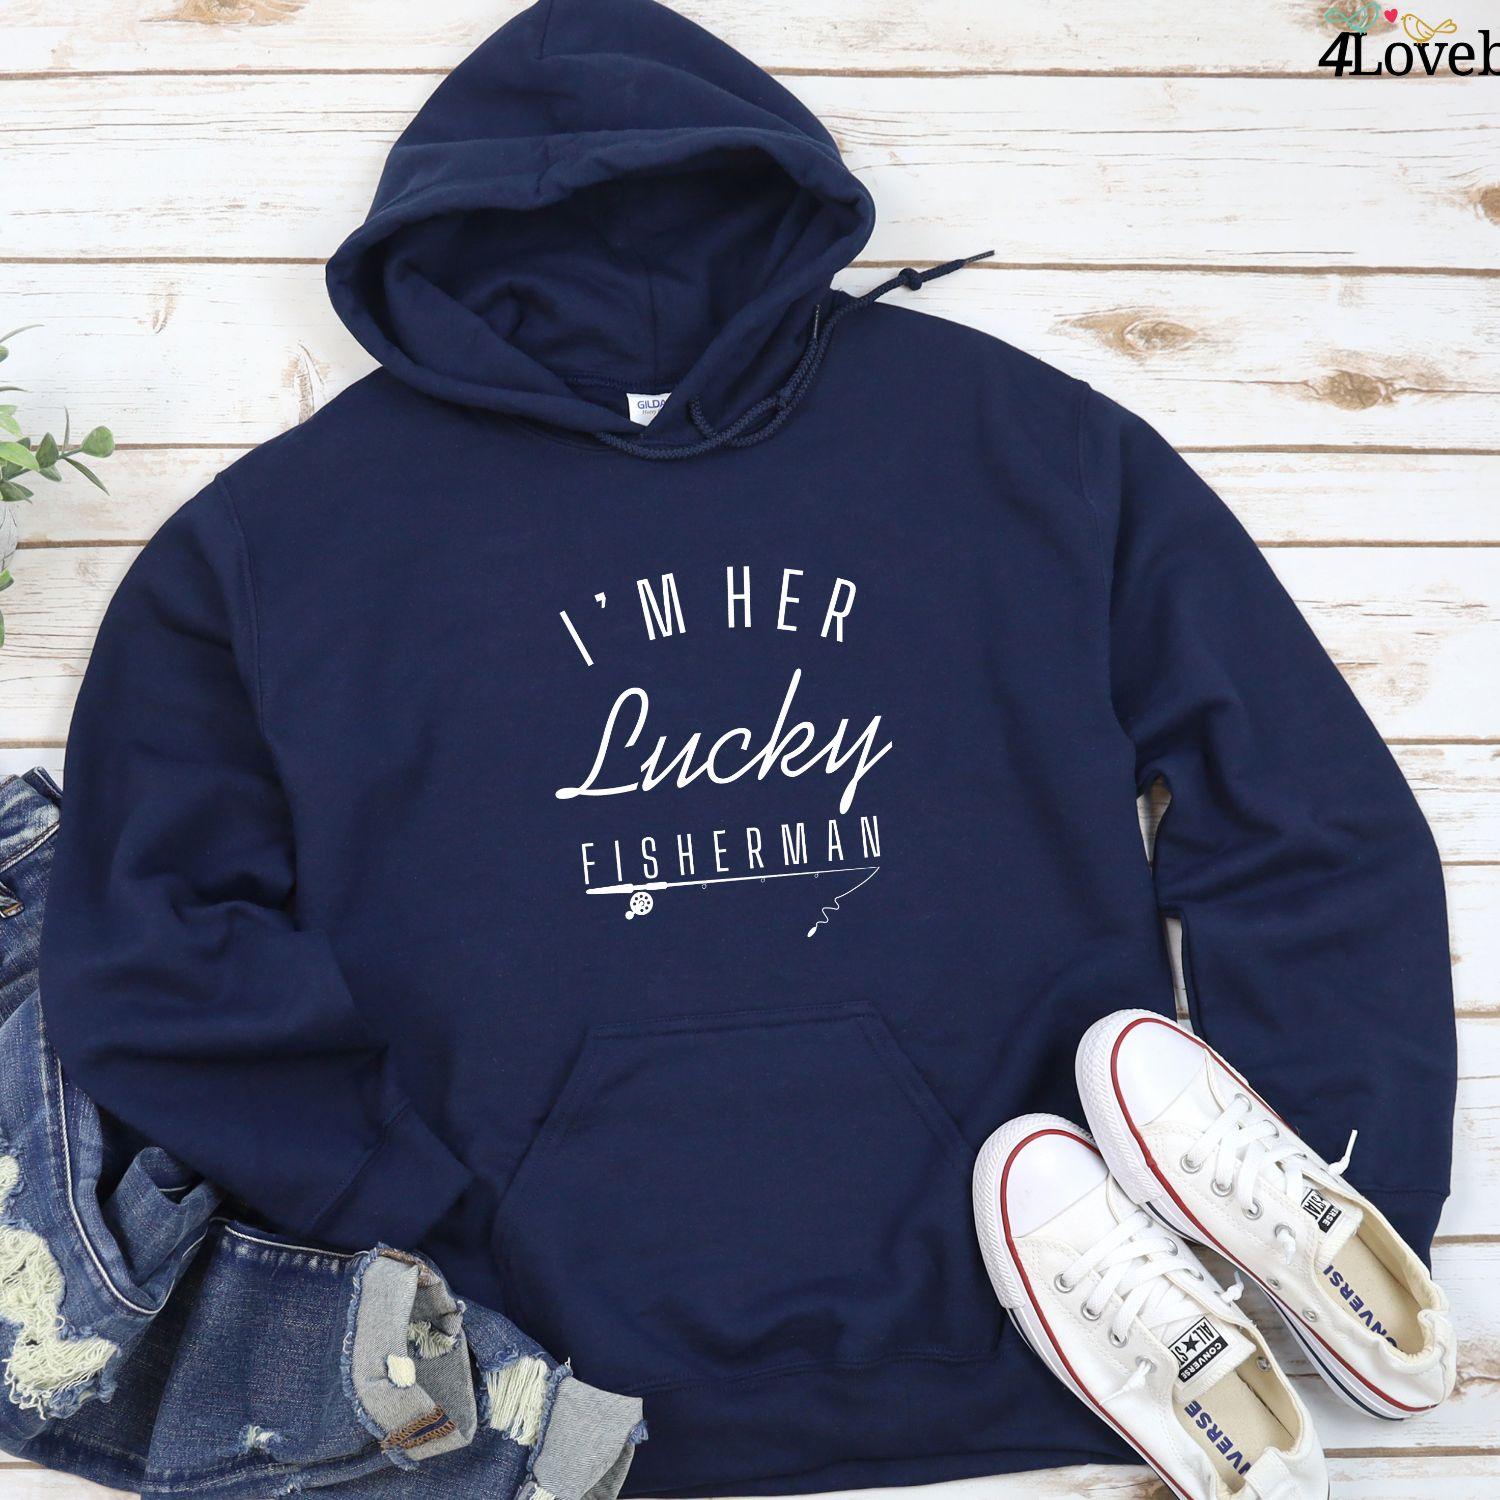 I'm Her Lucky Fisherman & I'm His Greatest Catch Matching Outfit Set - 4Lovebirds